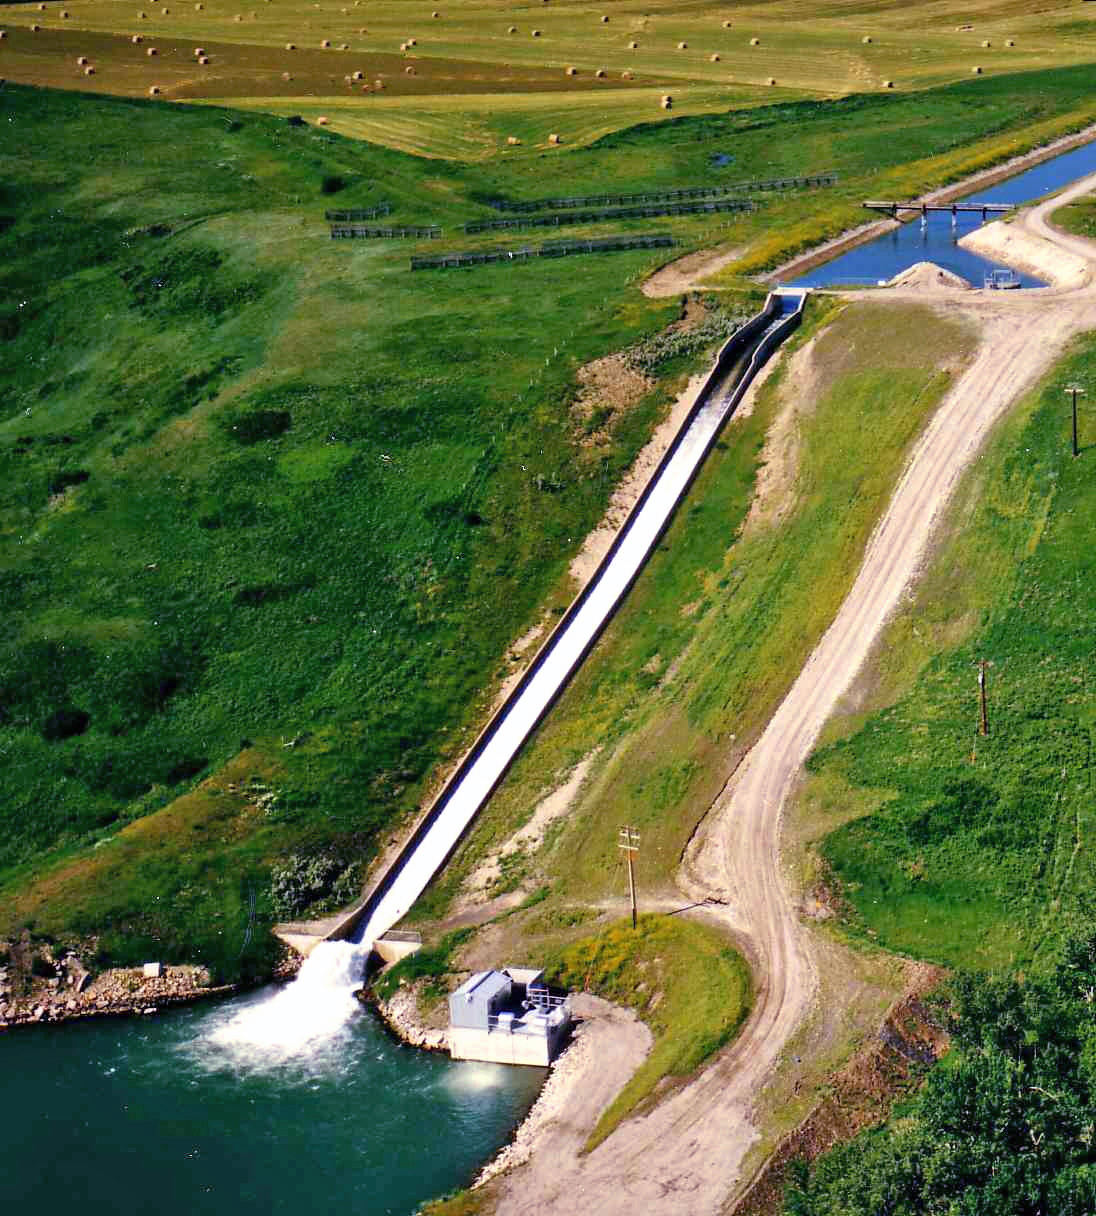 TransAlta’s Belly River Hydroelectric Facility